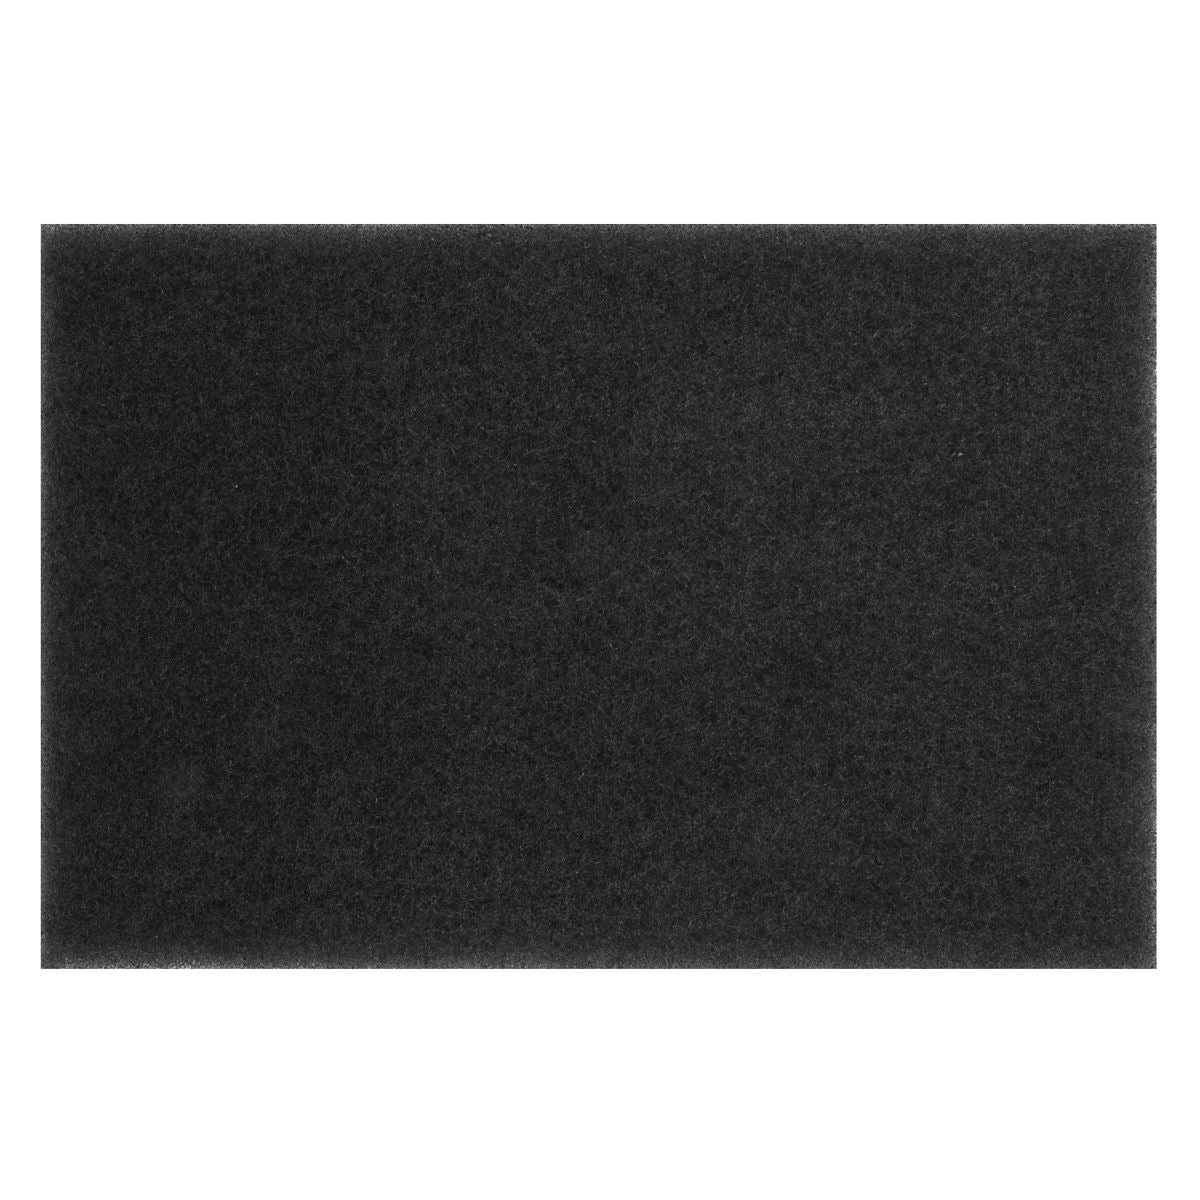 Worksafe by Sealey Black Stripping Pads 12 x 18 x 1" - Pack of 5